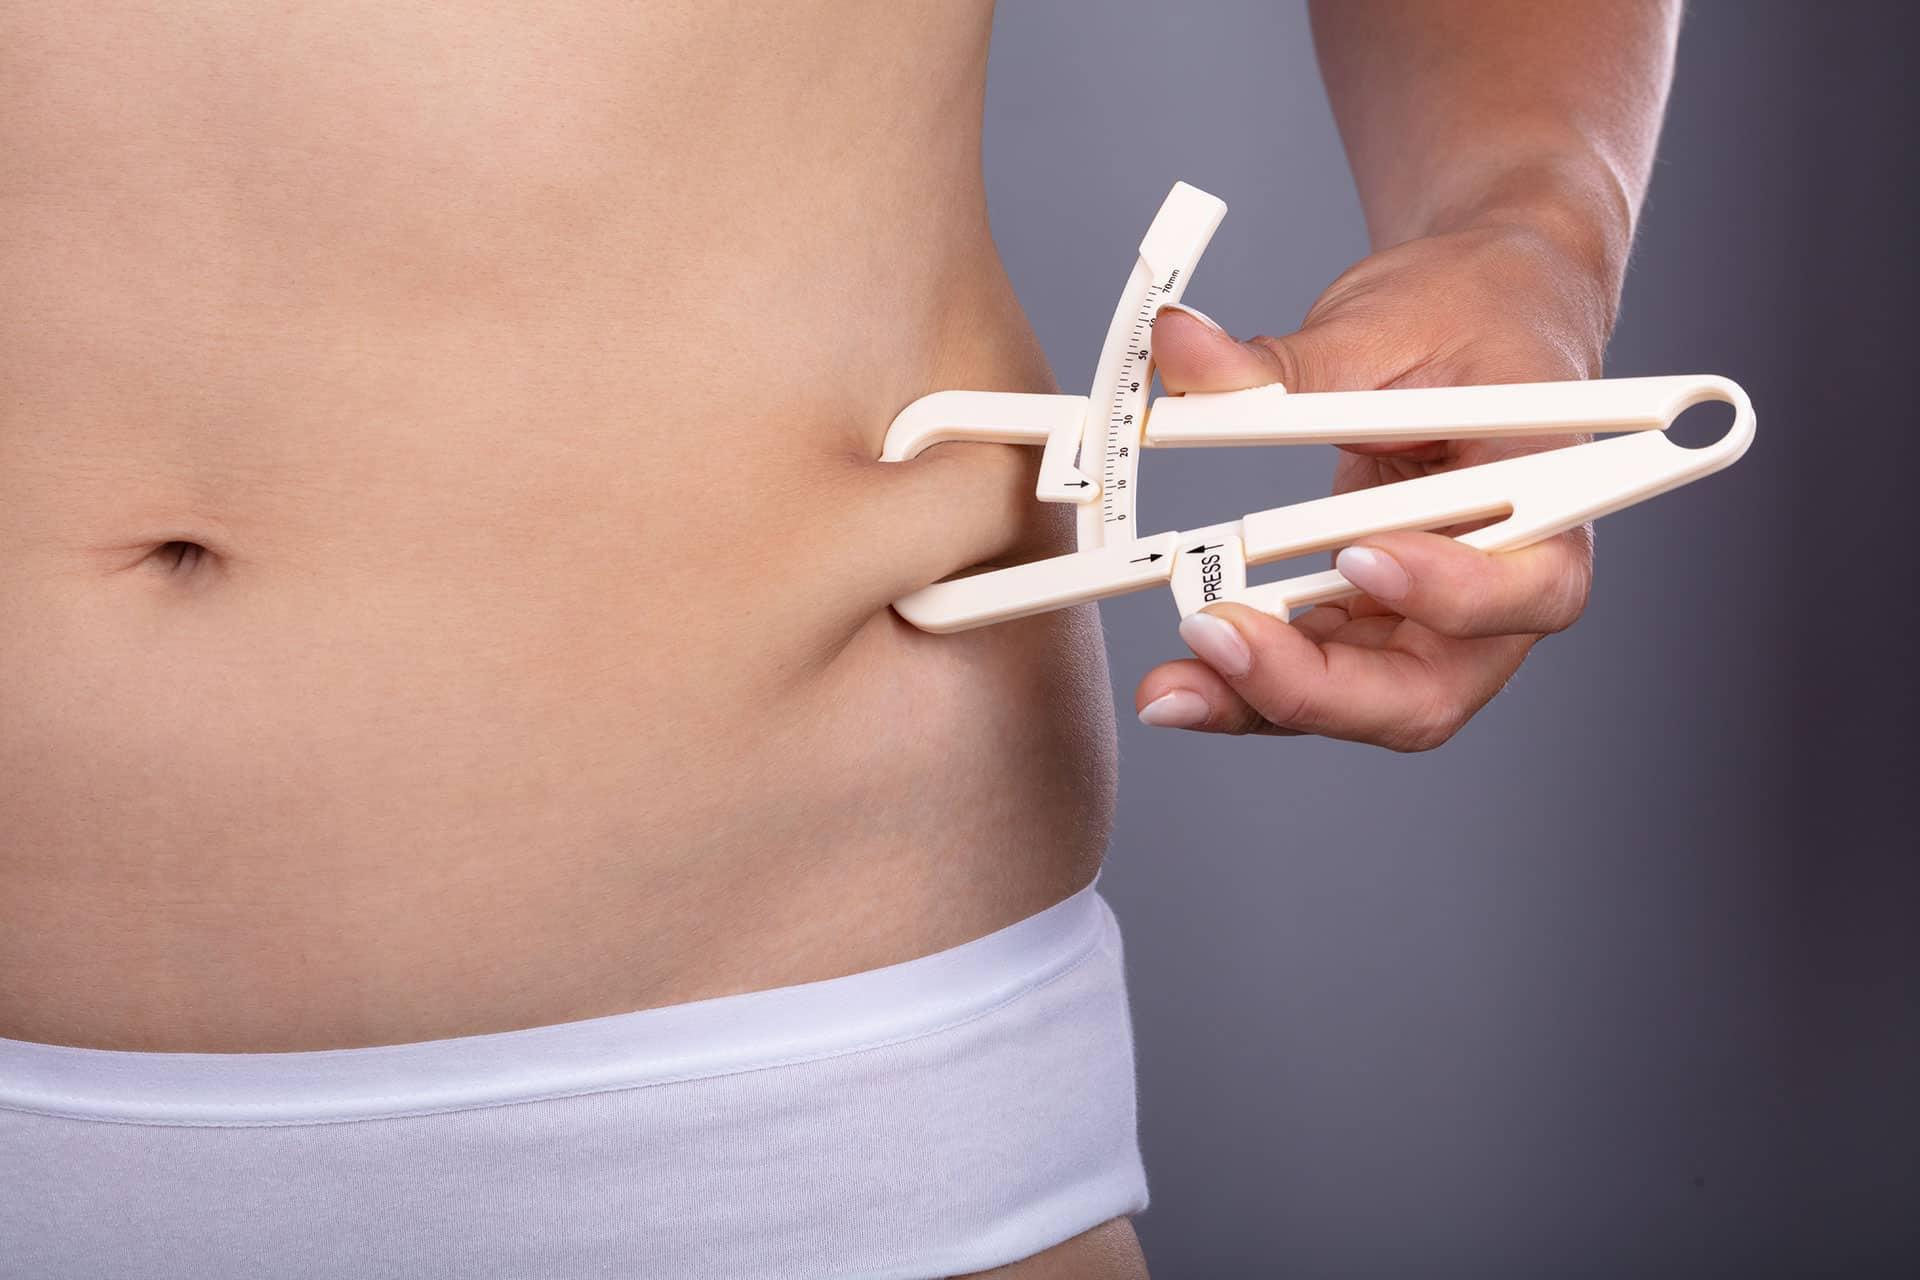 How to Measure Body Fat With Calipers